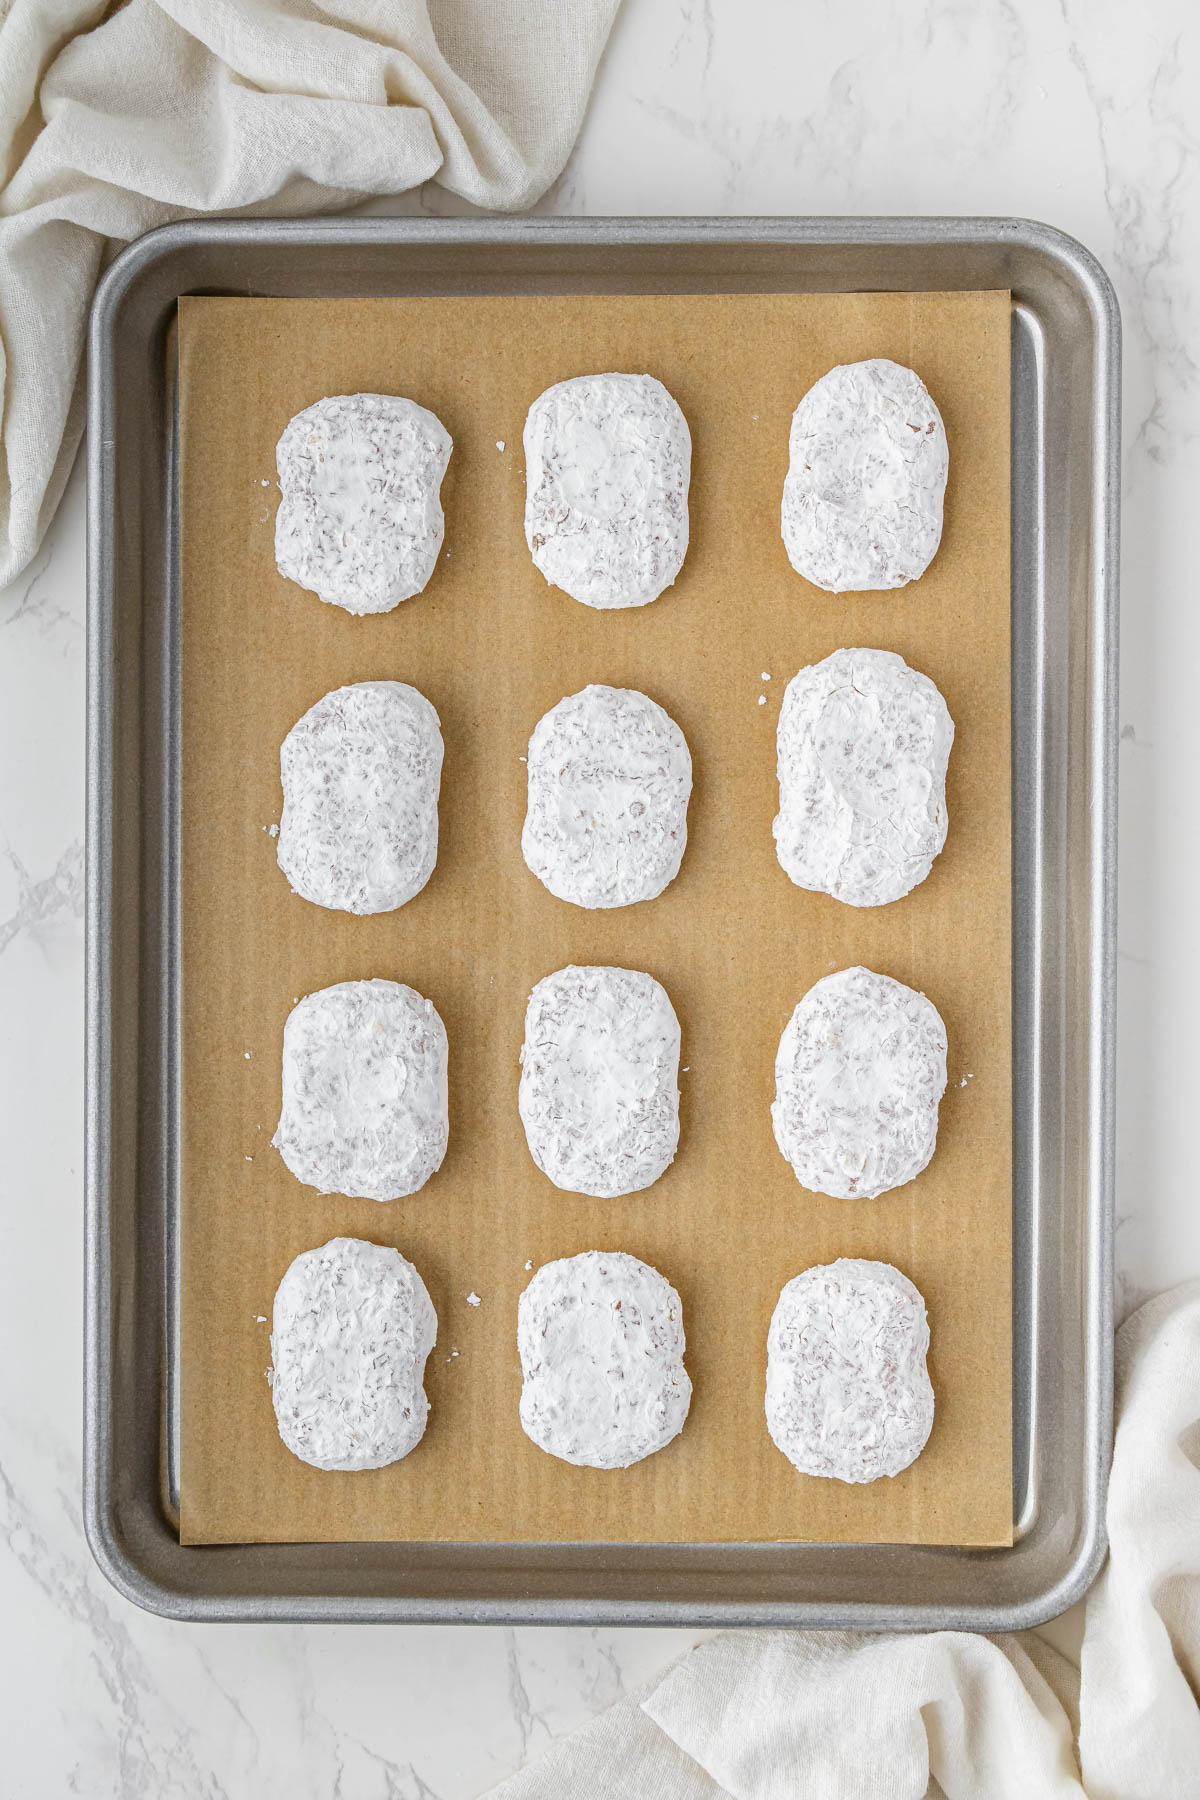 uncooked chicken nuggets on baking sheet with parchment paper